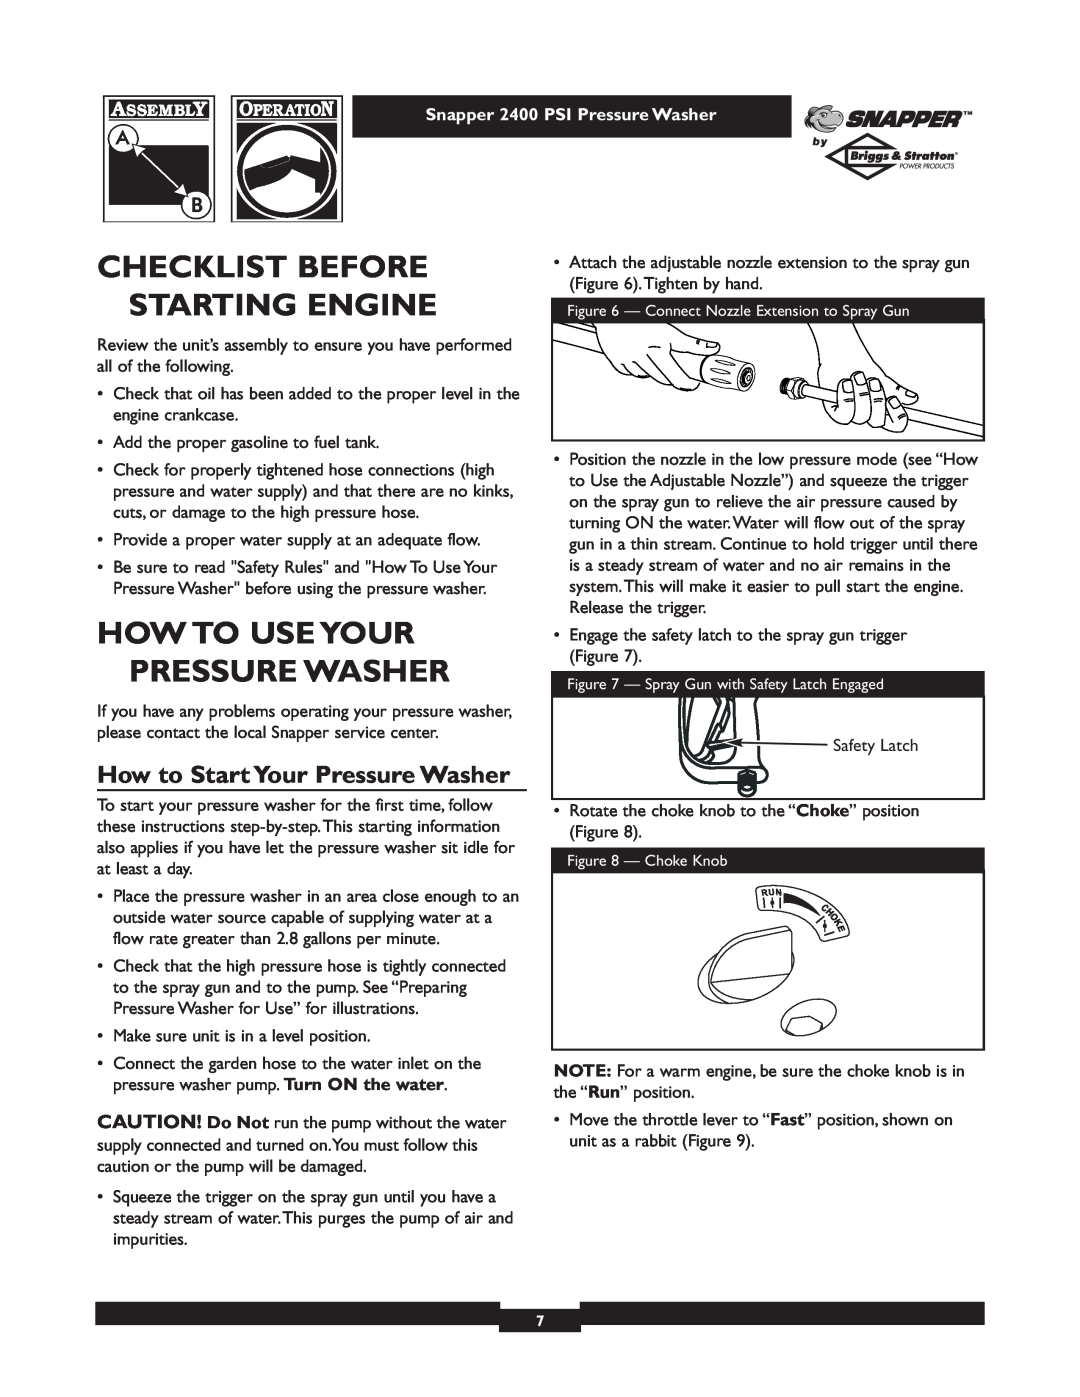 Snapper 1660-0 Checklist Before Starting Engine, How To Use Your Pressure Washer, How to Start Your Pressure Washer 